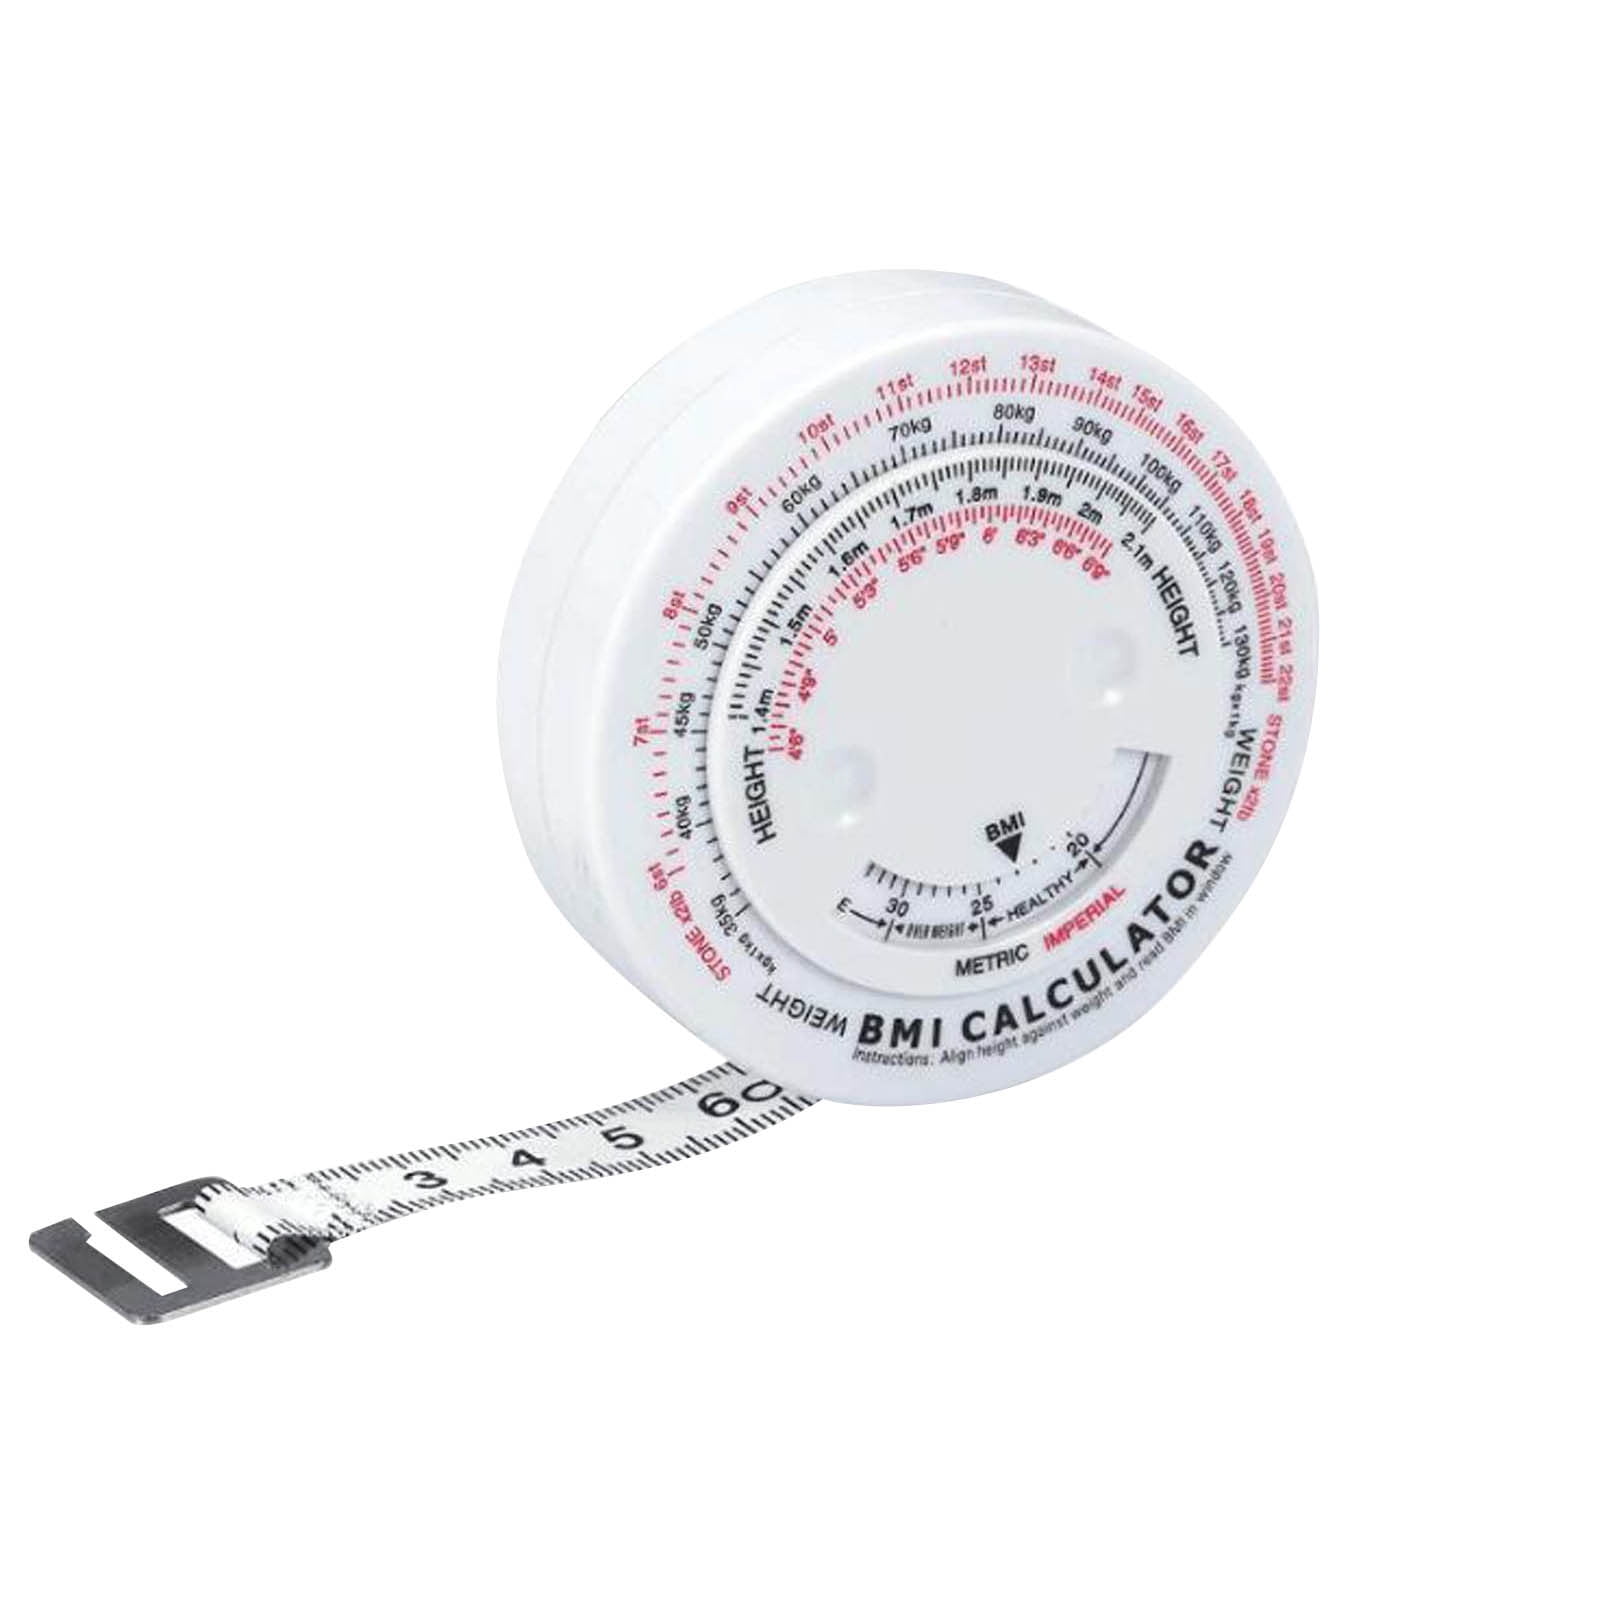 Tape Measure Measuring Tape for Body Fabric Sewing Tailor Cloth Knitting  Home Craft Measurements,60-inch/150-cm Soft Multicolor Tape Measure Body  Measuring Tape Set with Snap Button Closure,Dual Sided 